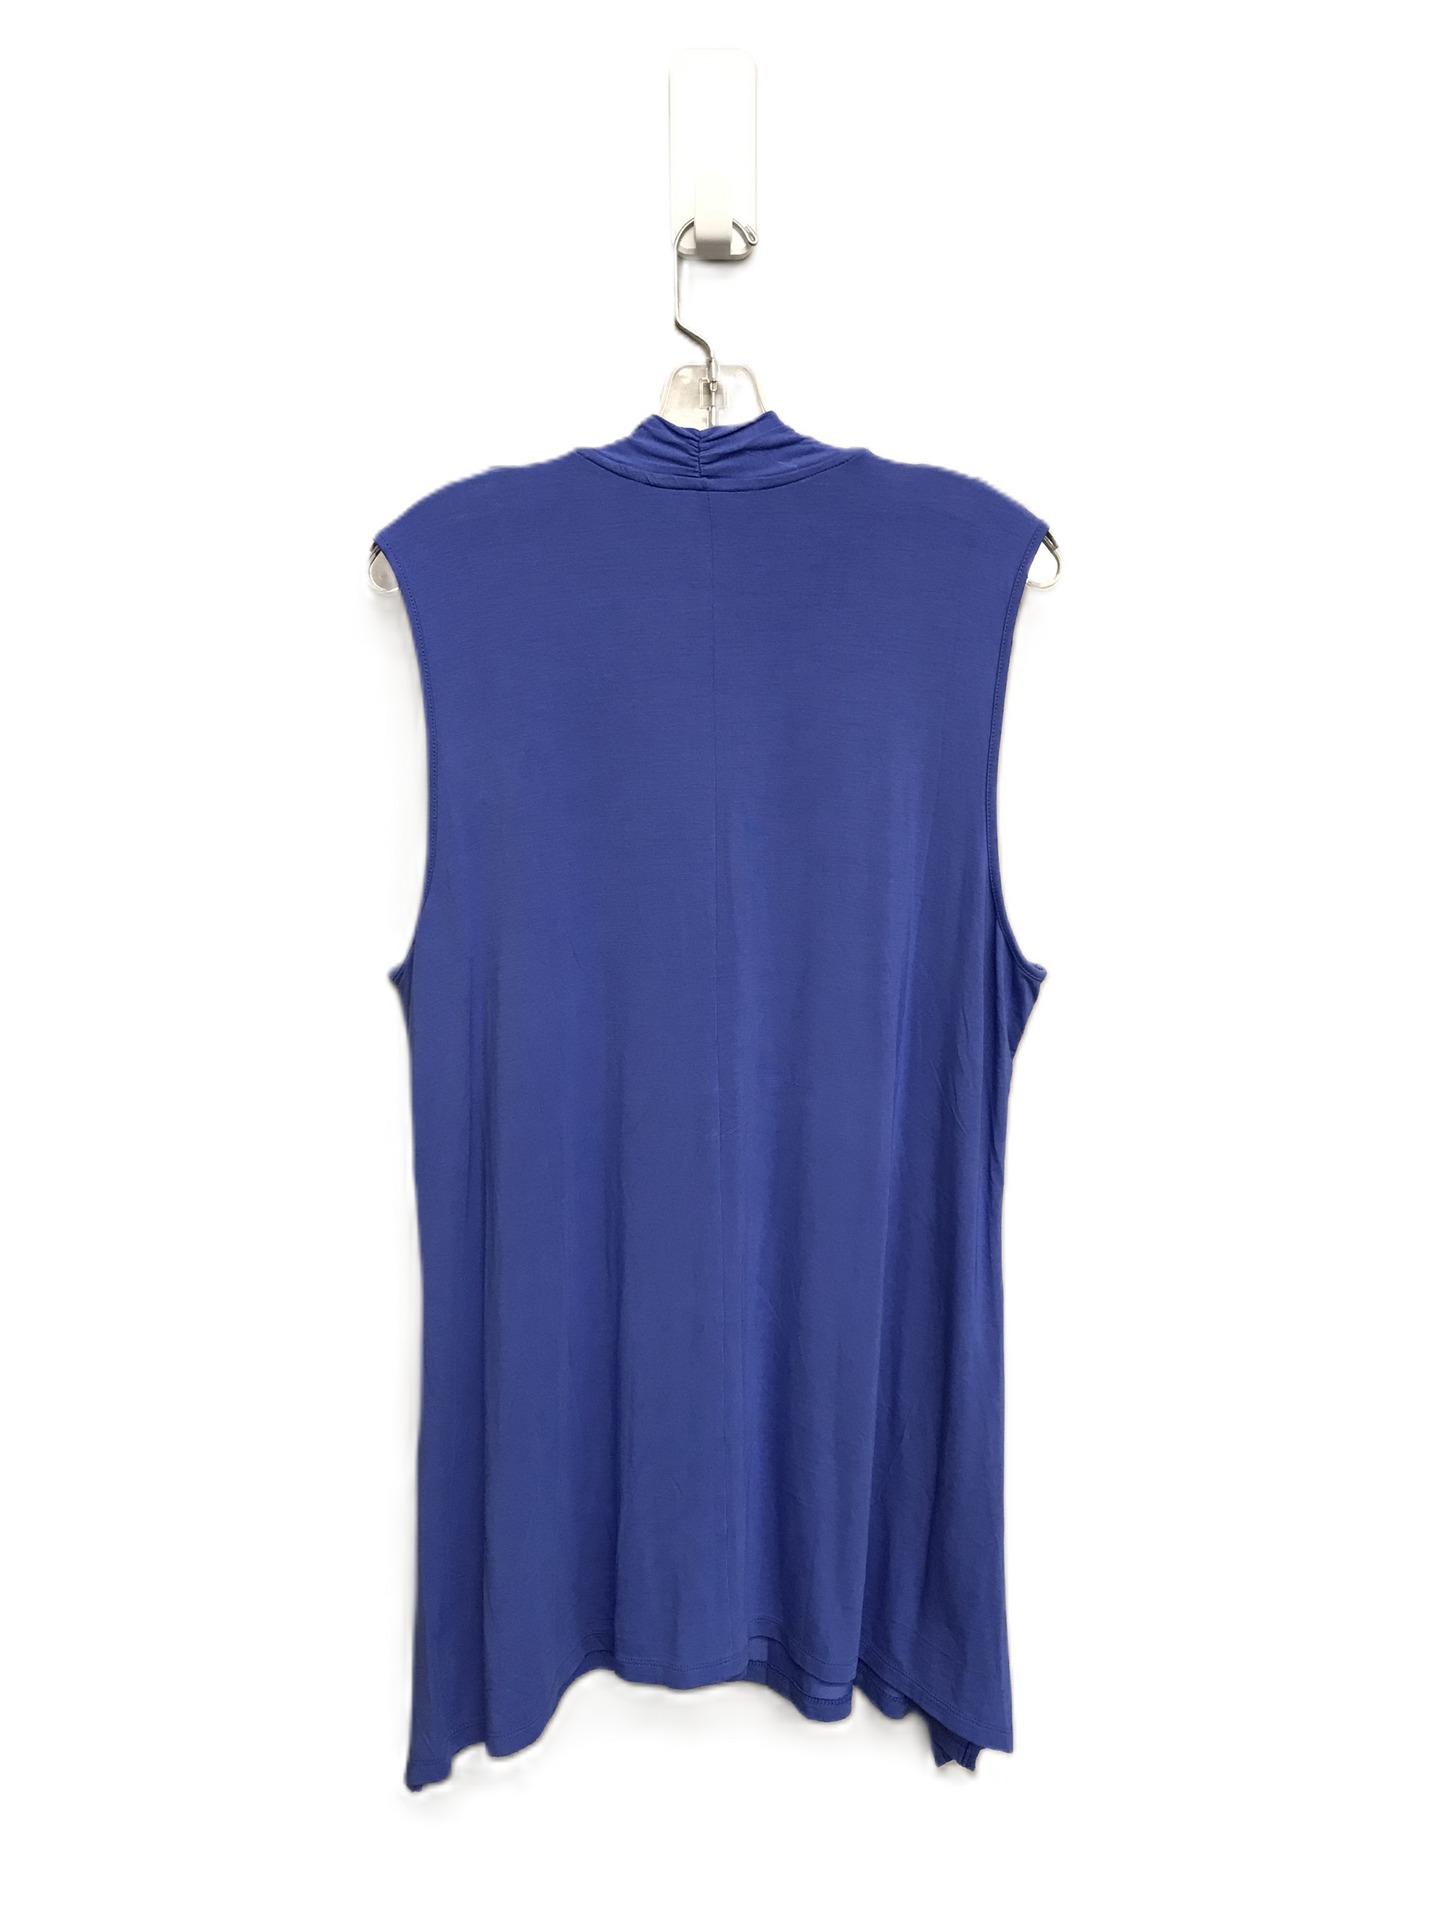 Blue Top Sleeveless By Soft Surroundings, Size: 1x